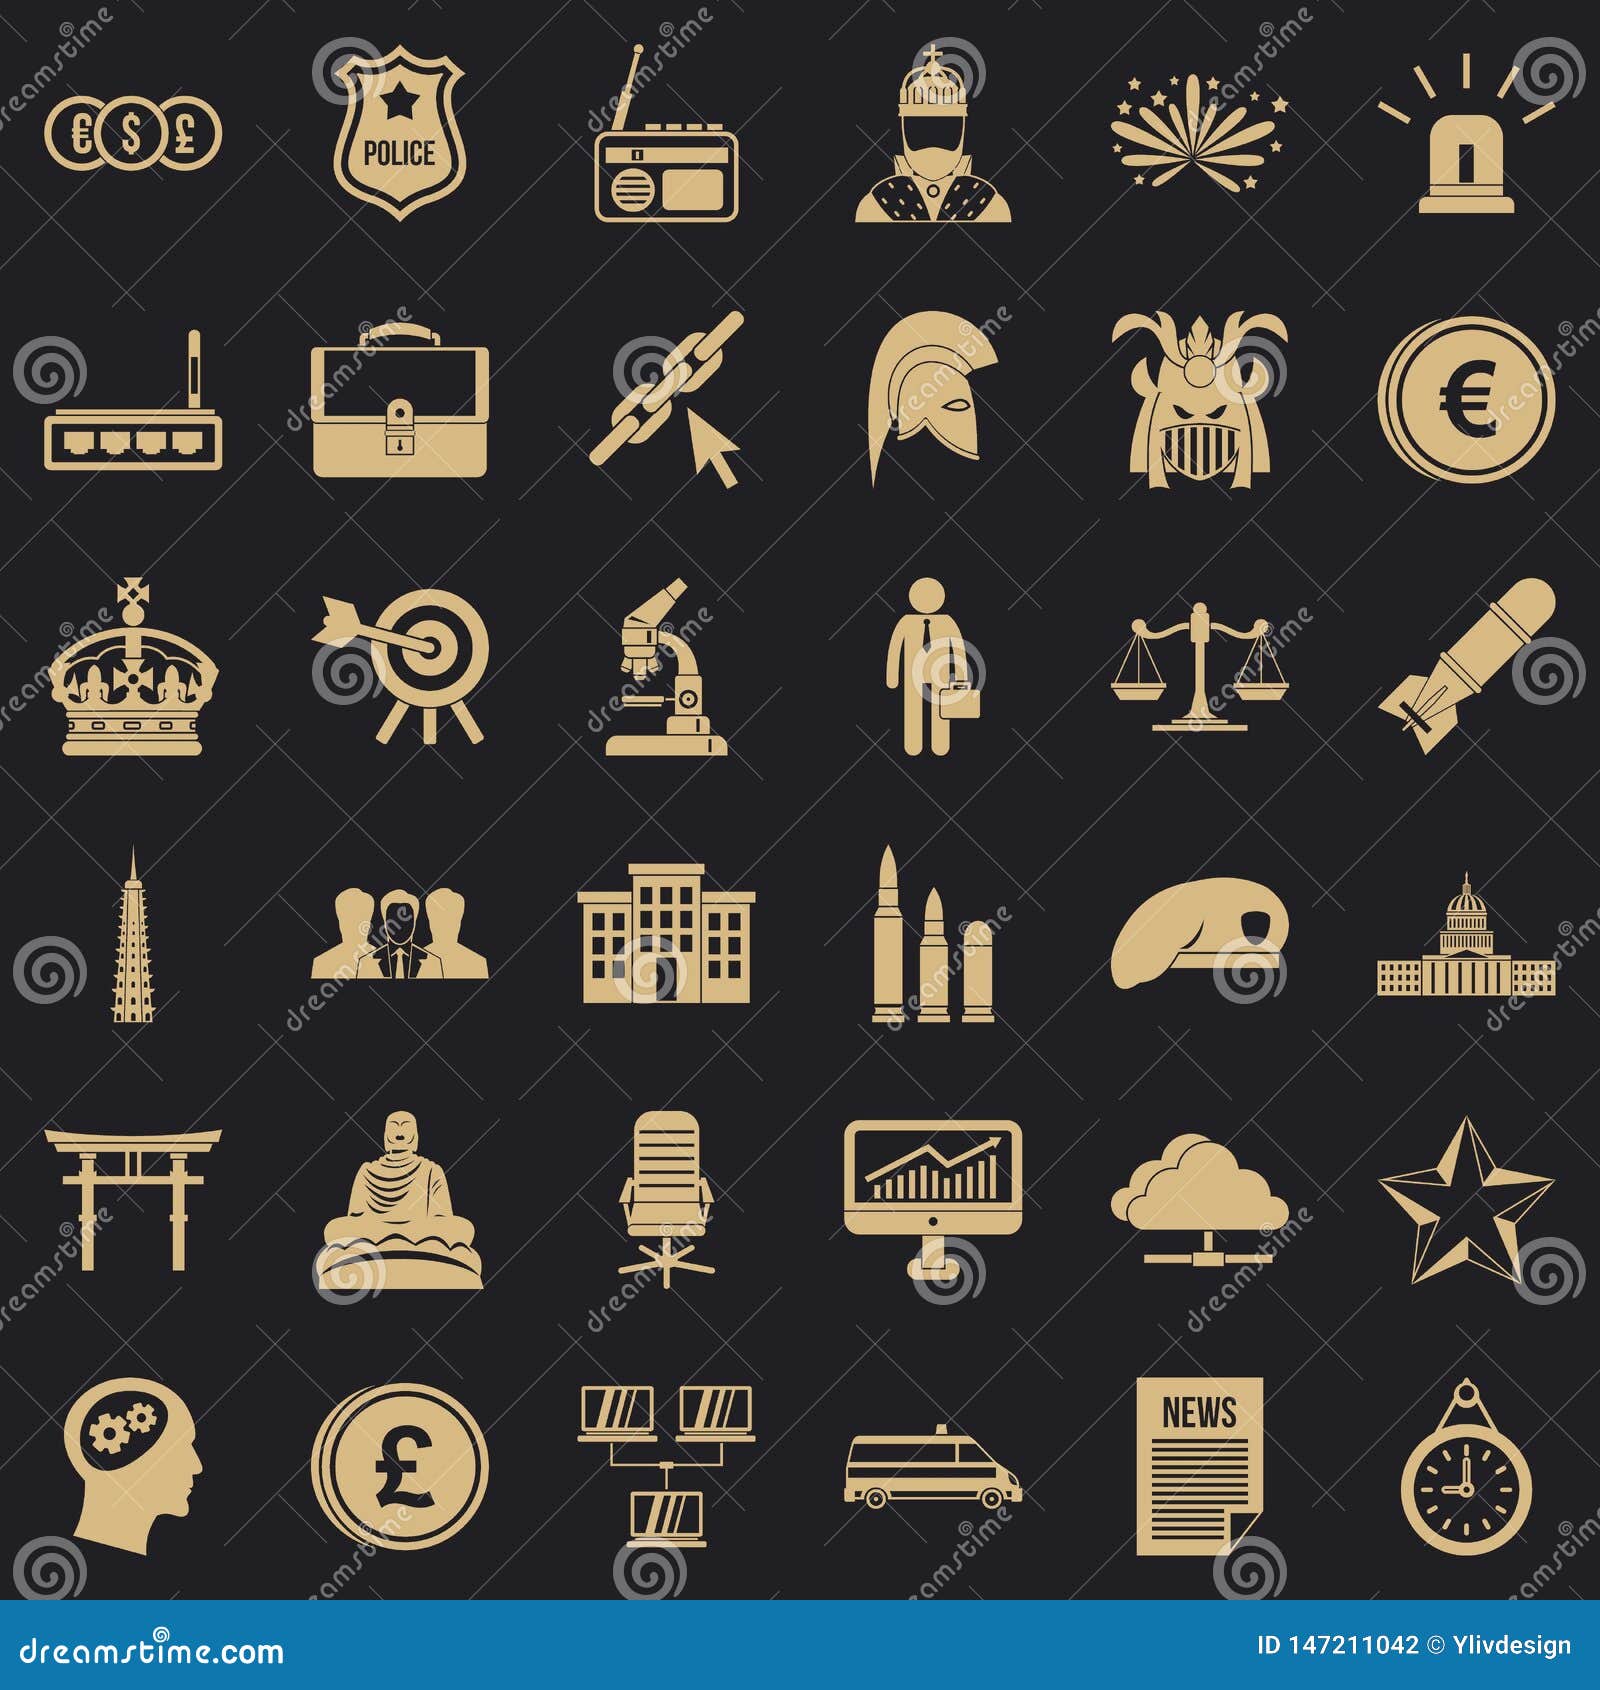 goverment icons set, simple style